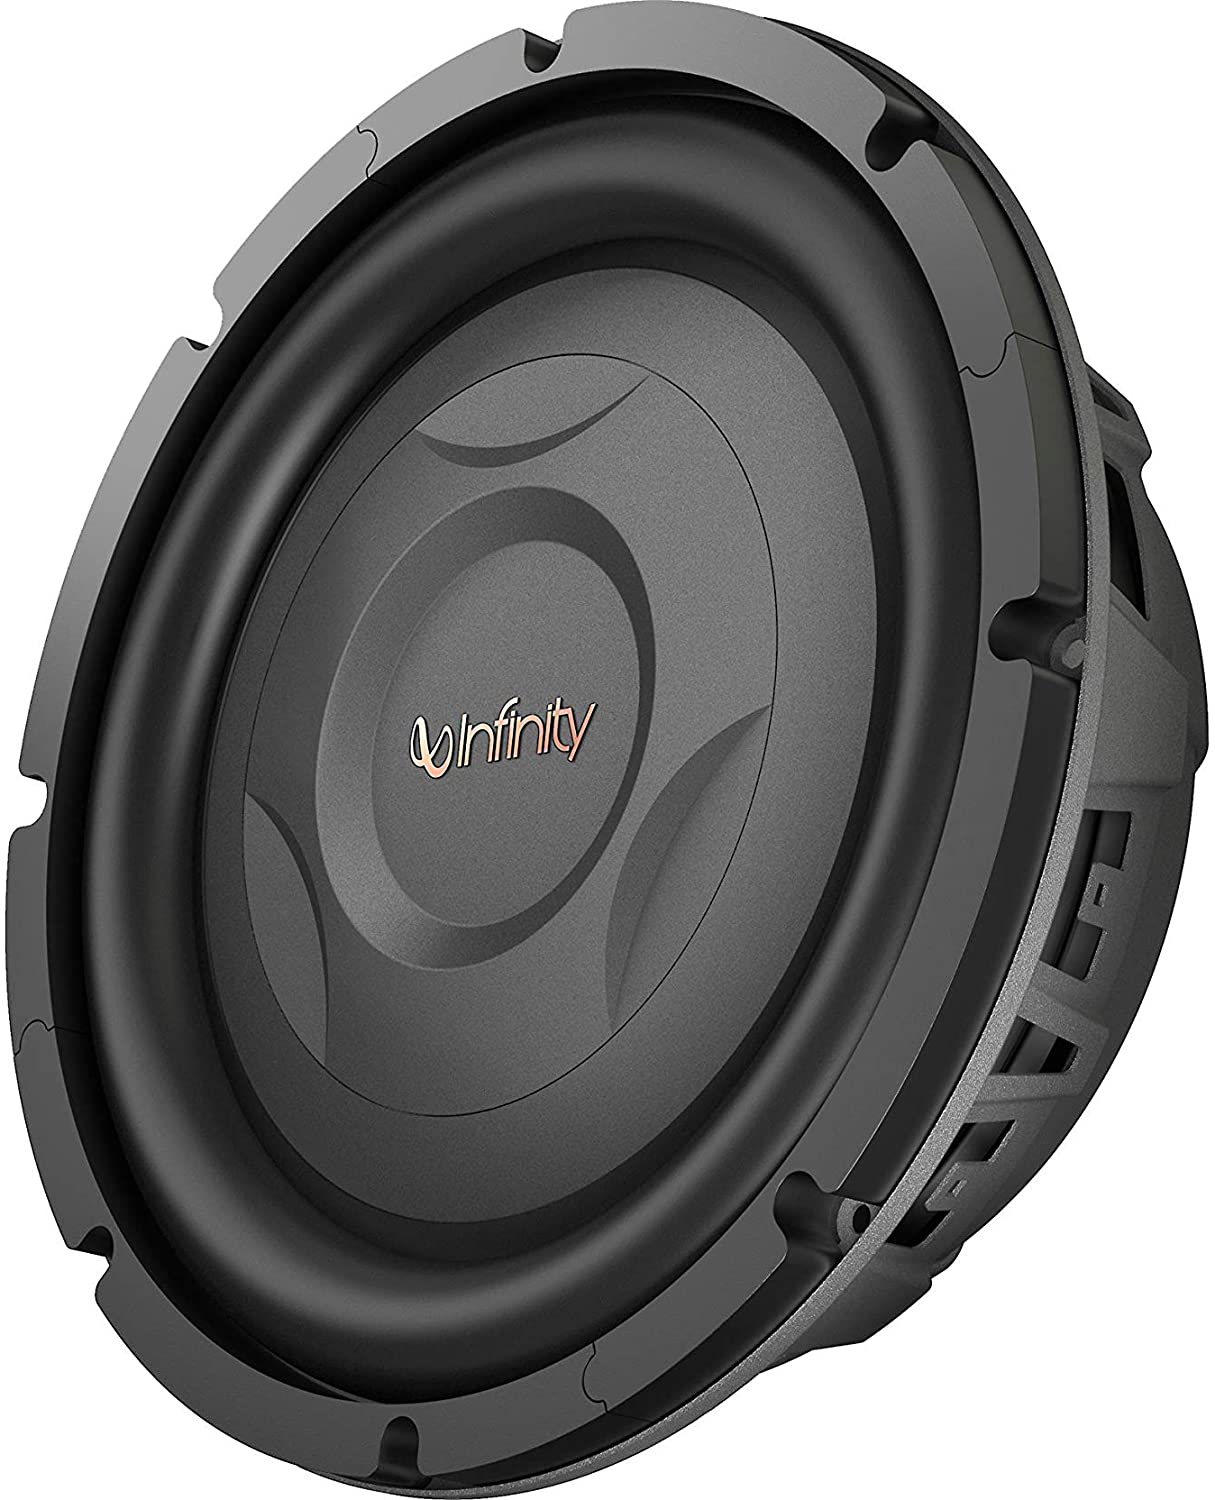 Best Shallow Mount 10 inch Subwoofer